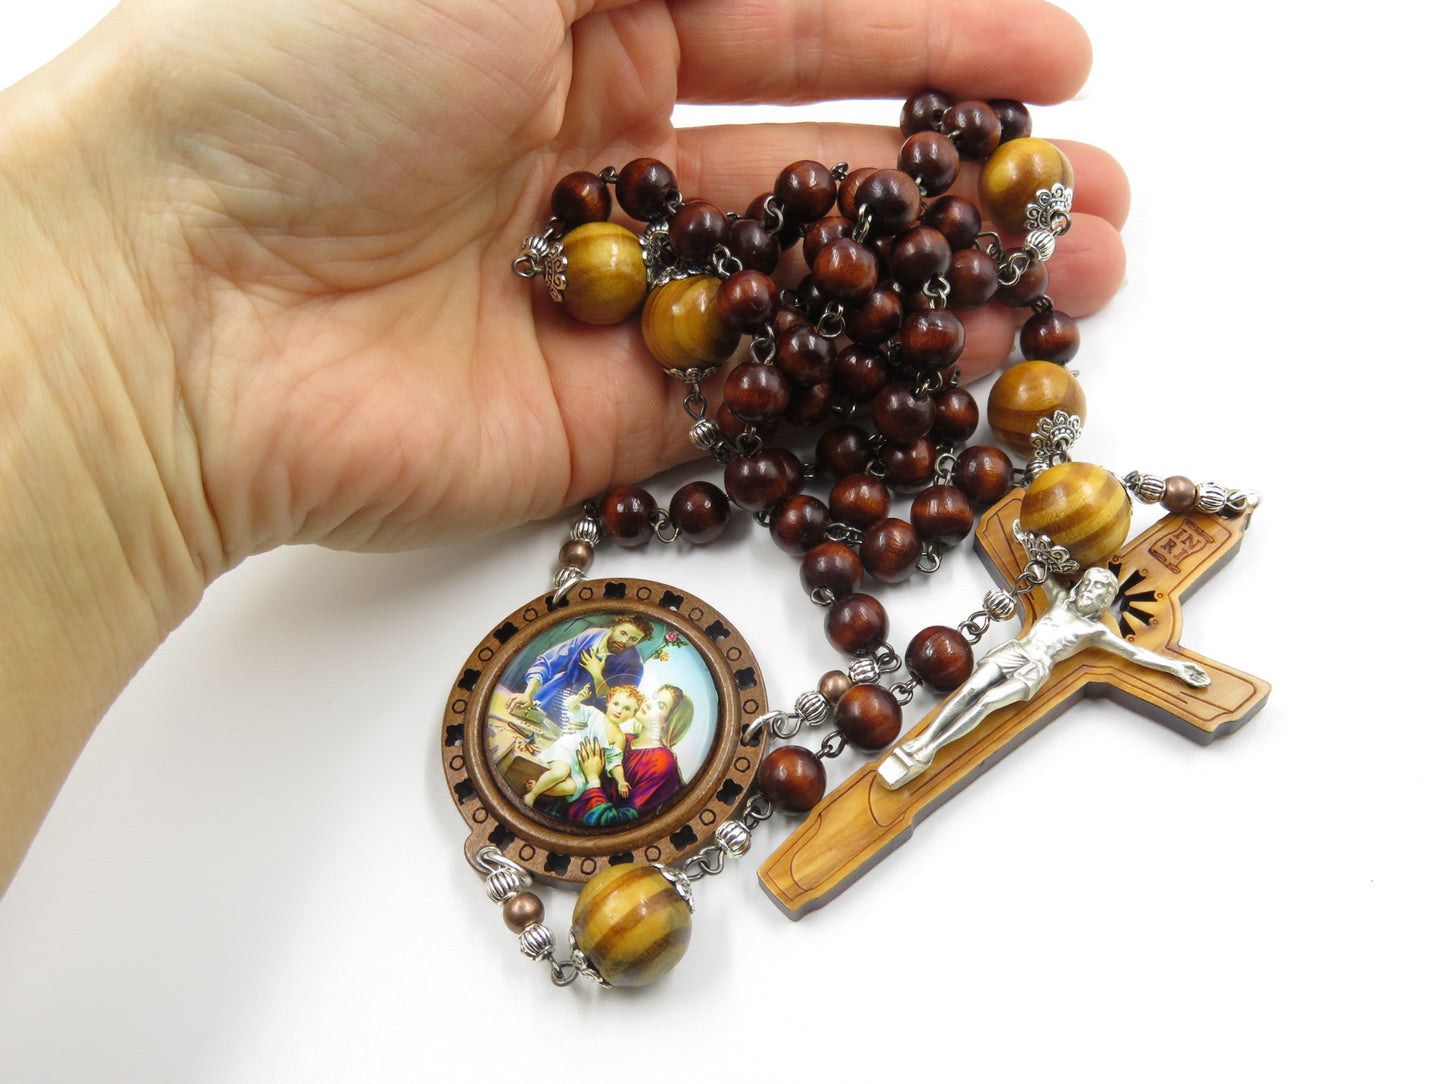 Holy Family wooden rosary beads, Handcrafted wooden Rosaries, Wooden Rosary beads, Large wood Crucifix, rosary beads, Religious gift.